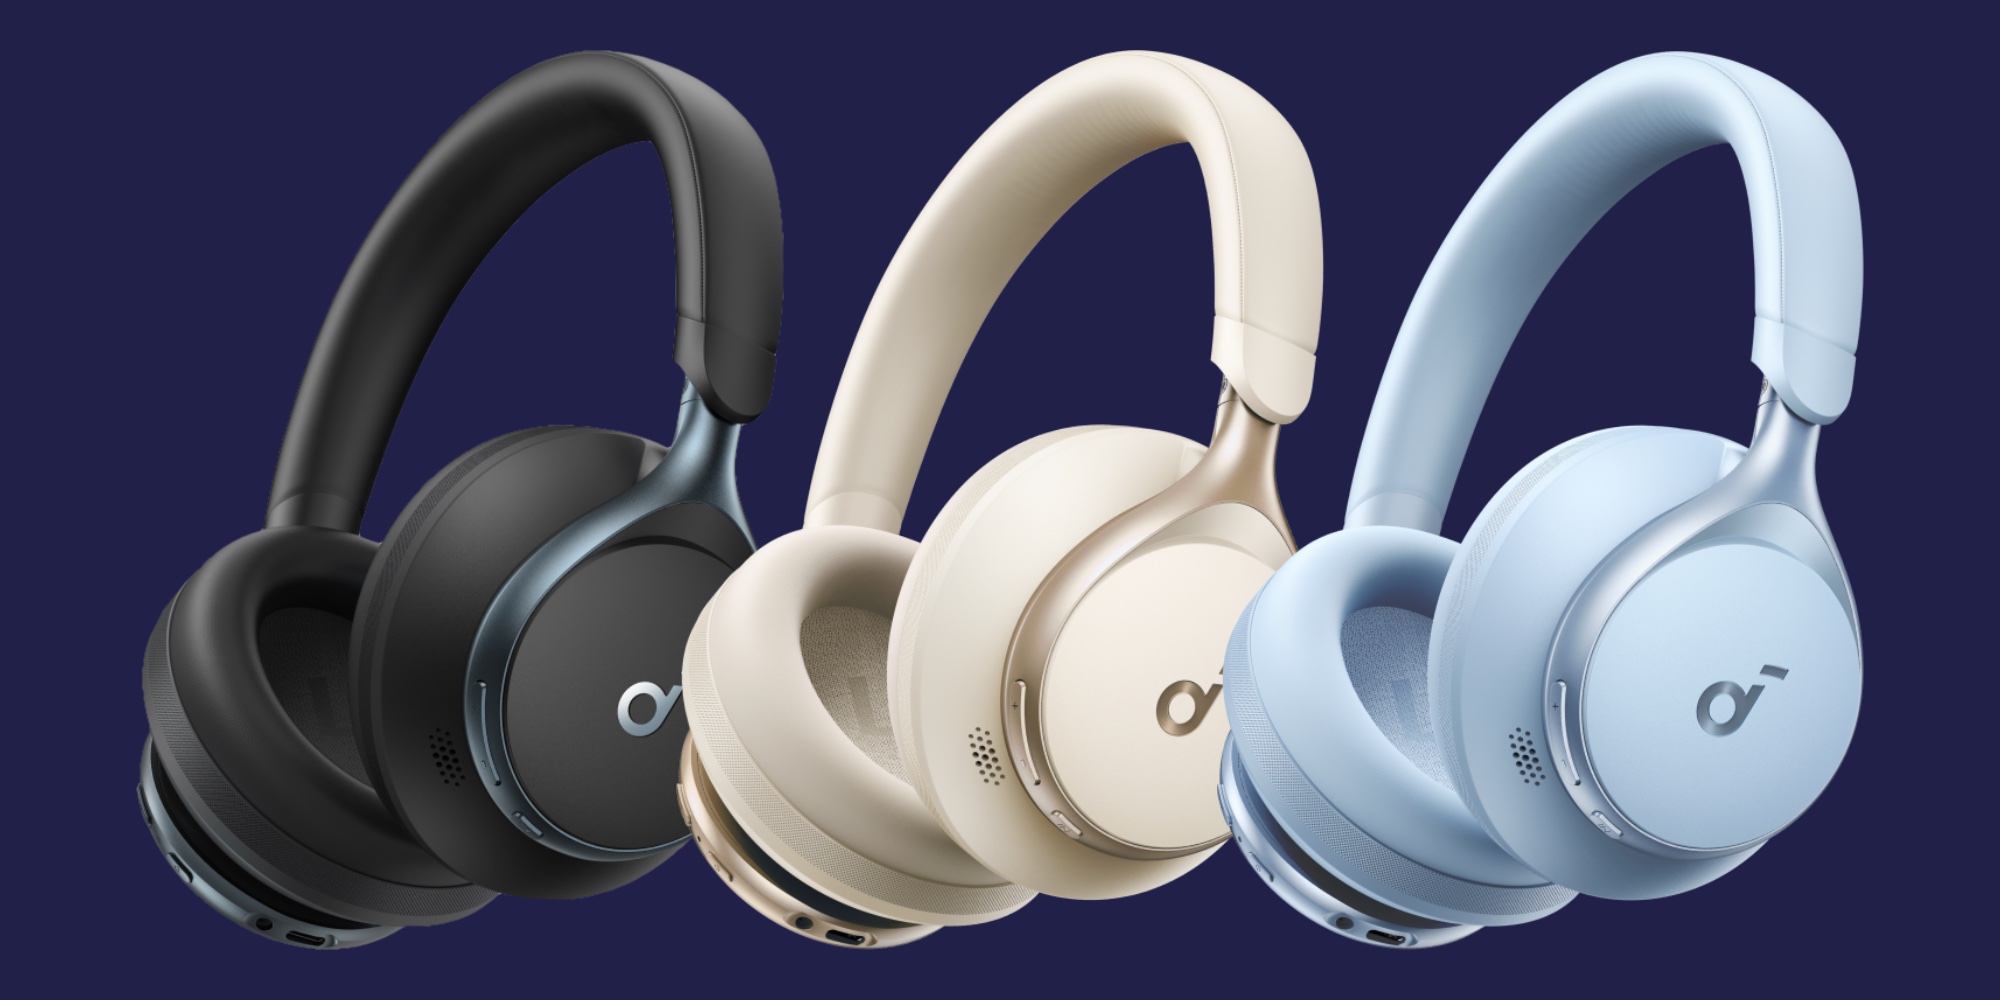 JBL expands its LIVE Series of headphones with ANC models